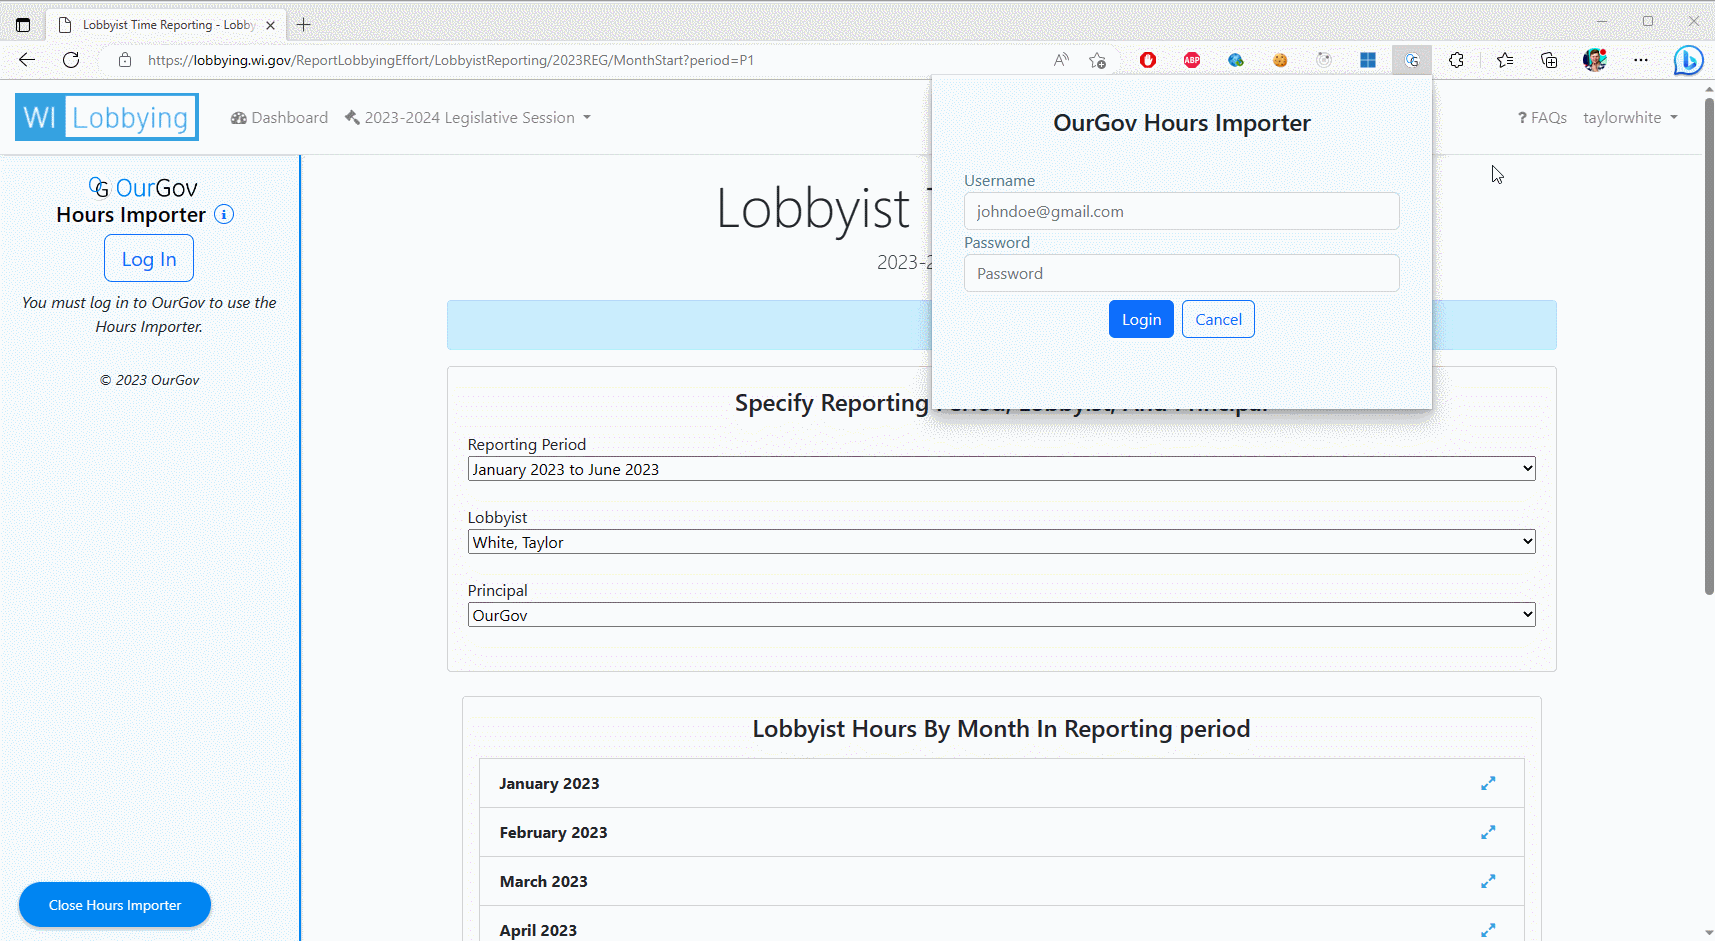 OurGov's Hours Importer tool allows quickly import your lobbying hours to the Eye On Lobbying Site.